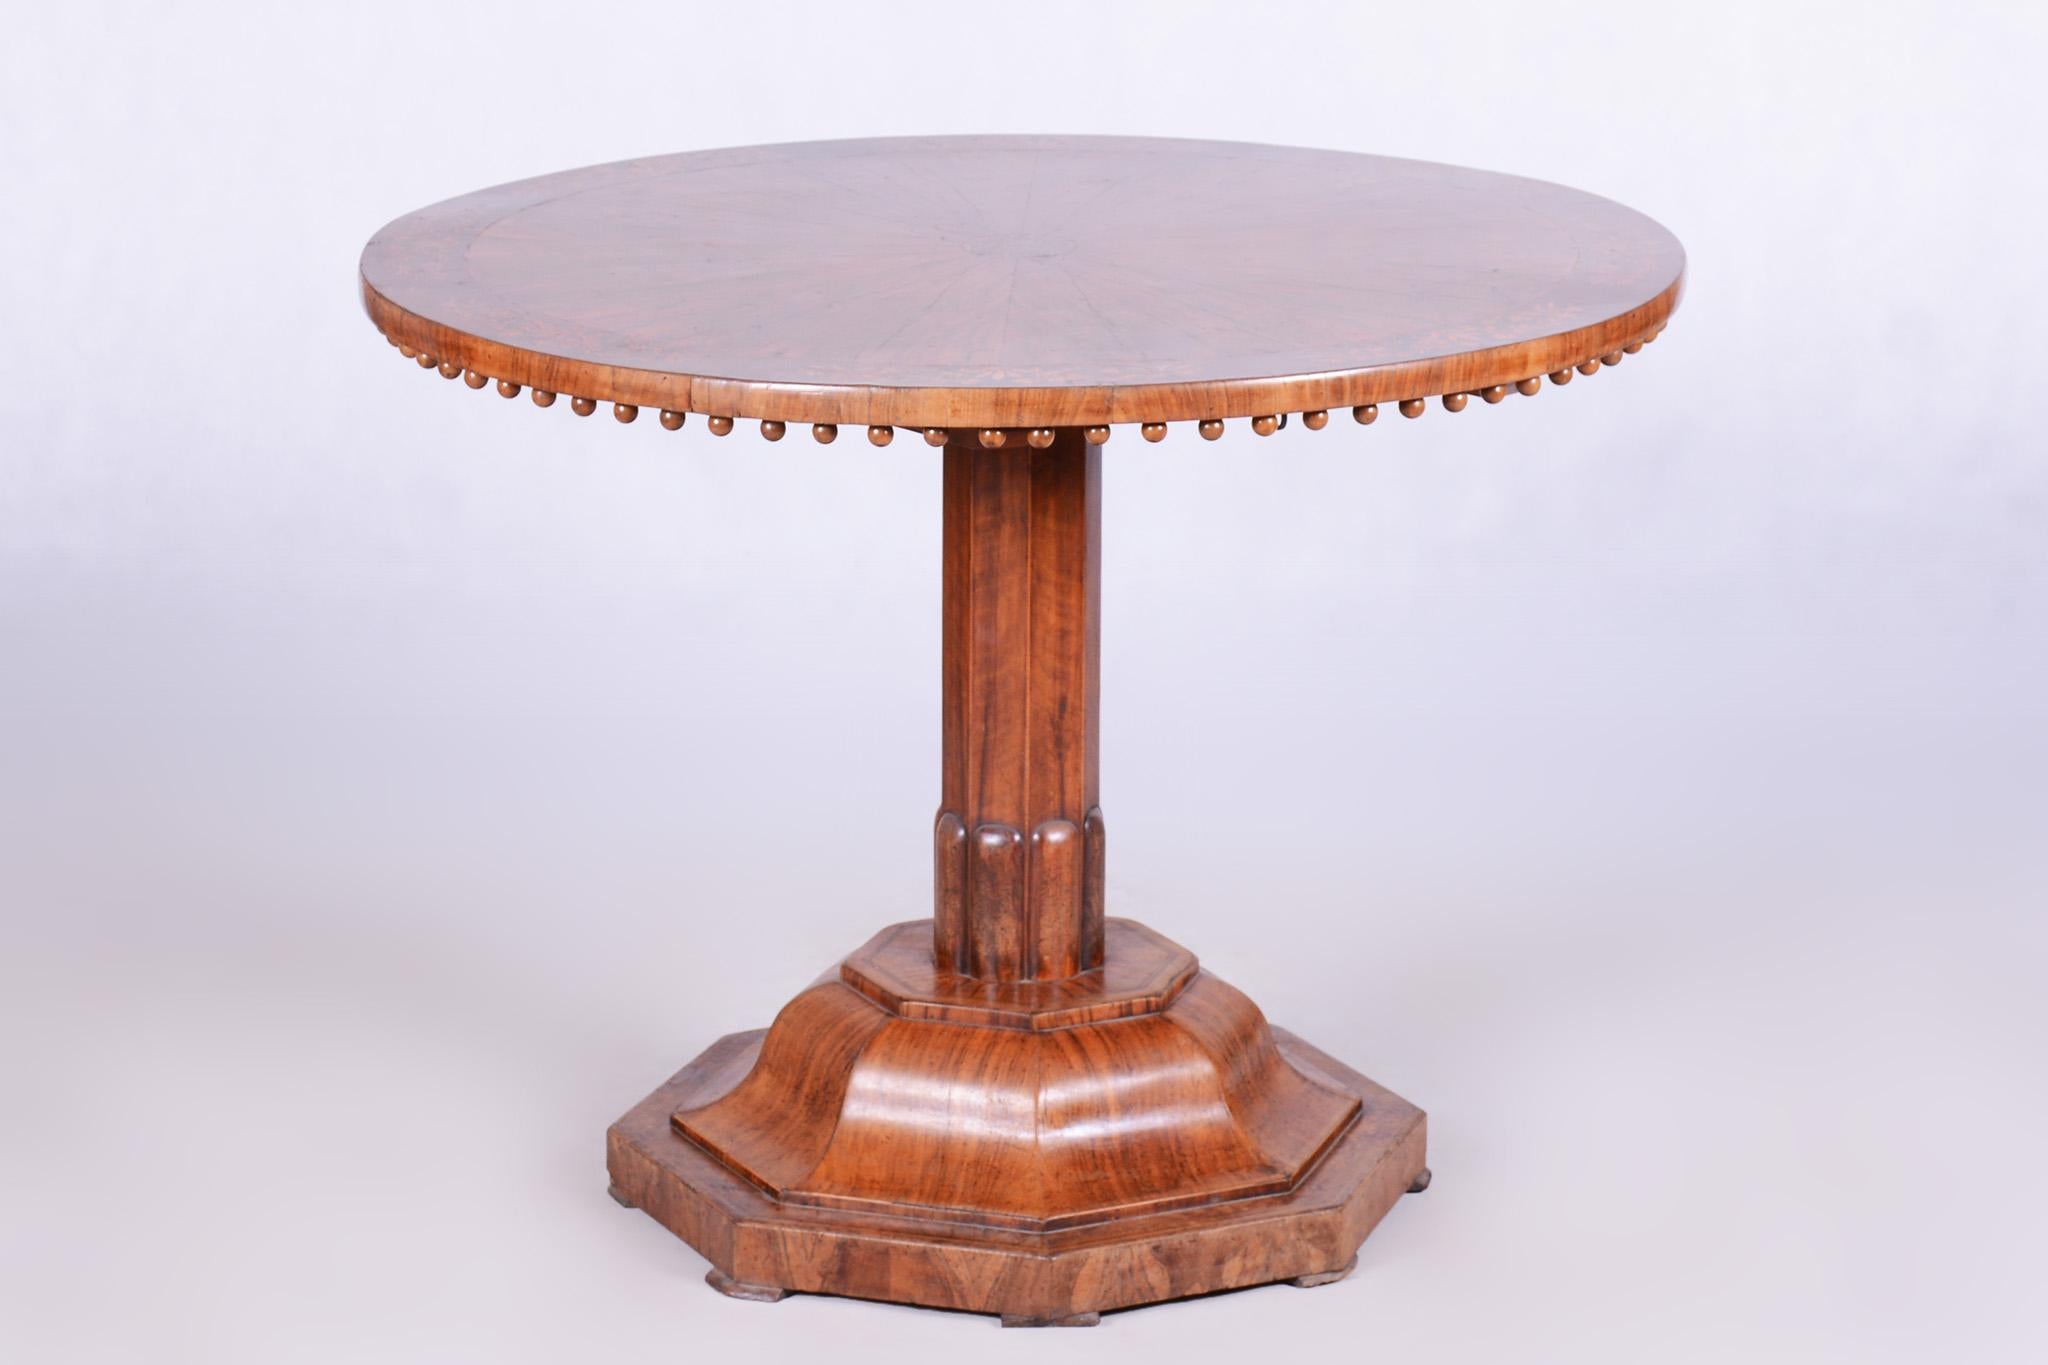 Unique Restored Austrian Biedermeier walnut folding round dining table.

Period: 1820-1829
Architect: Josef Danhauser
Source: Austria

The table has a very practical mechanism for folding the top plate.
Completely restored.
Revived by the